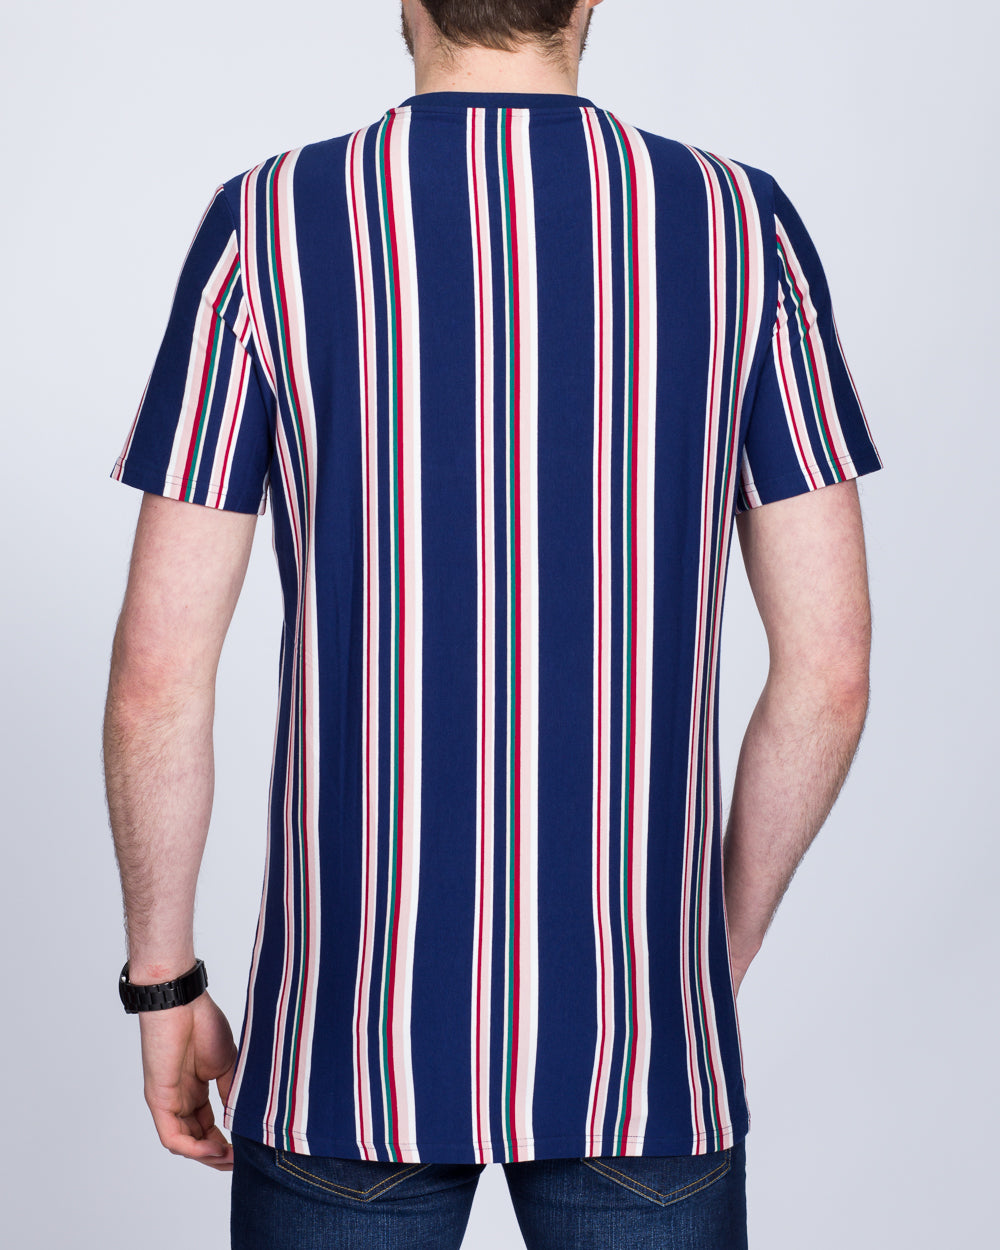 2t Tall Striped T-Shirt (navy/red)